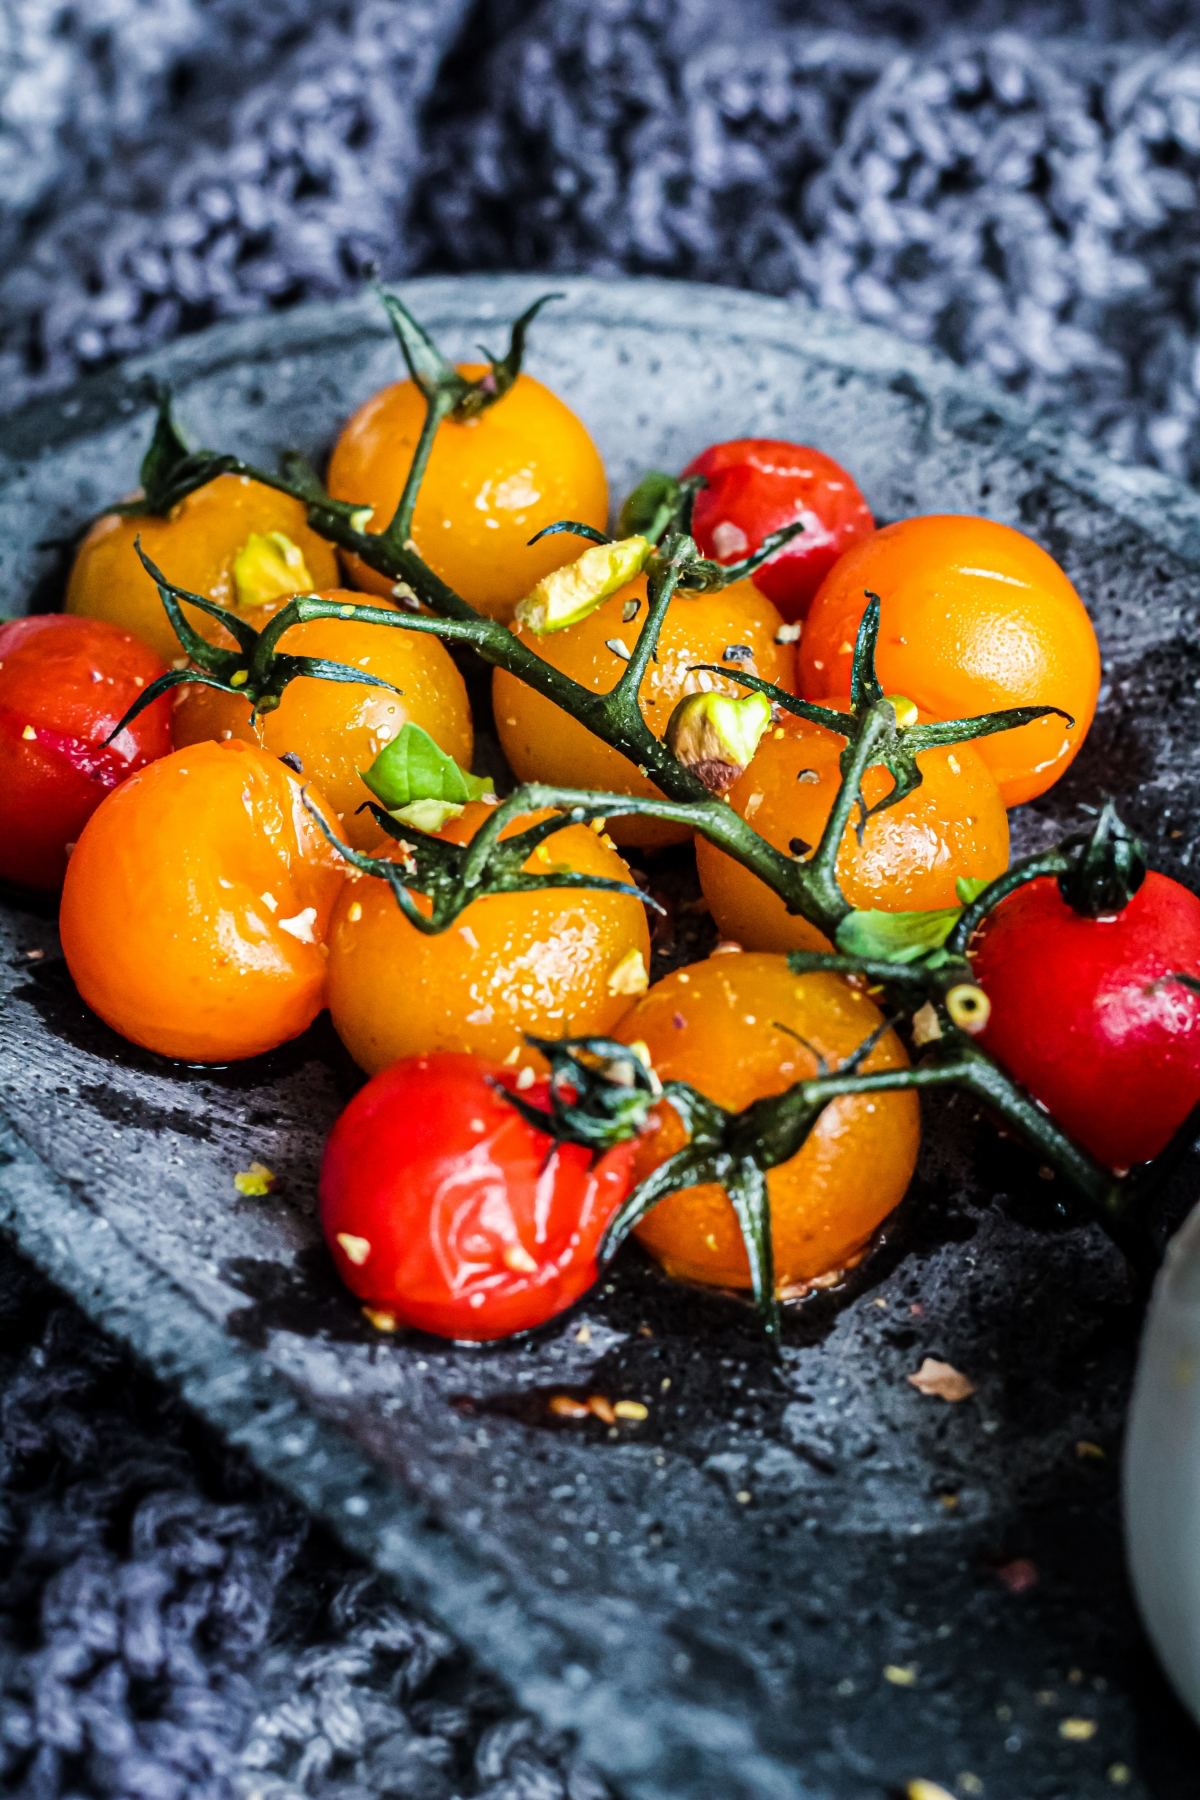 health benefits of eating tomatoes everyday